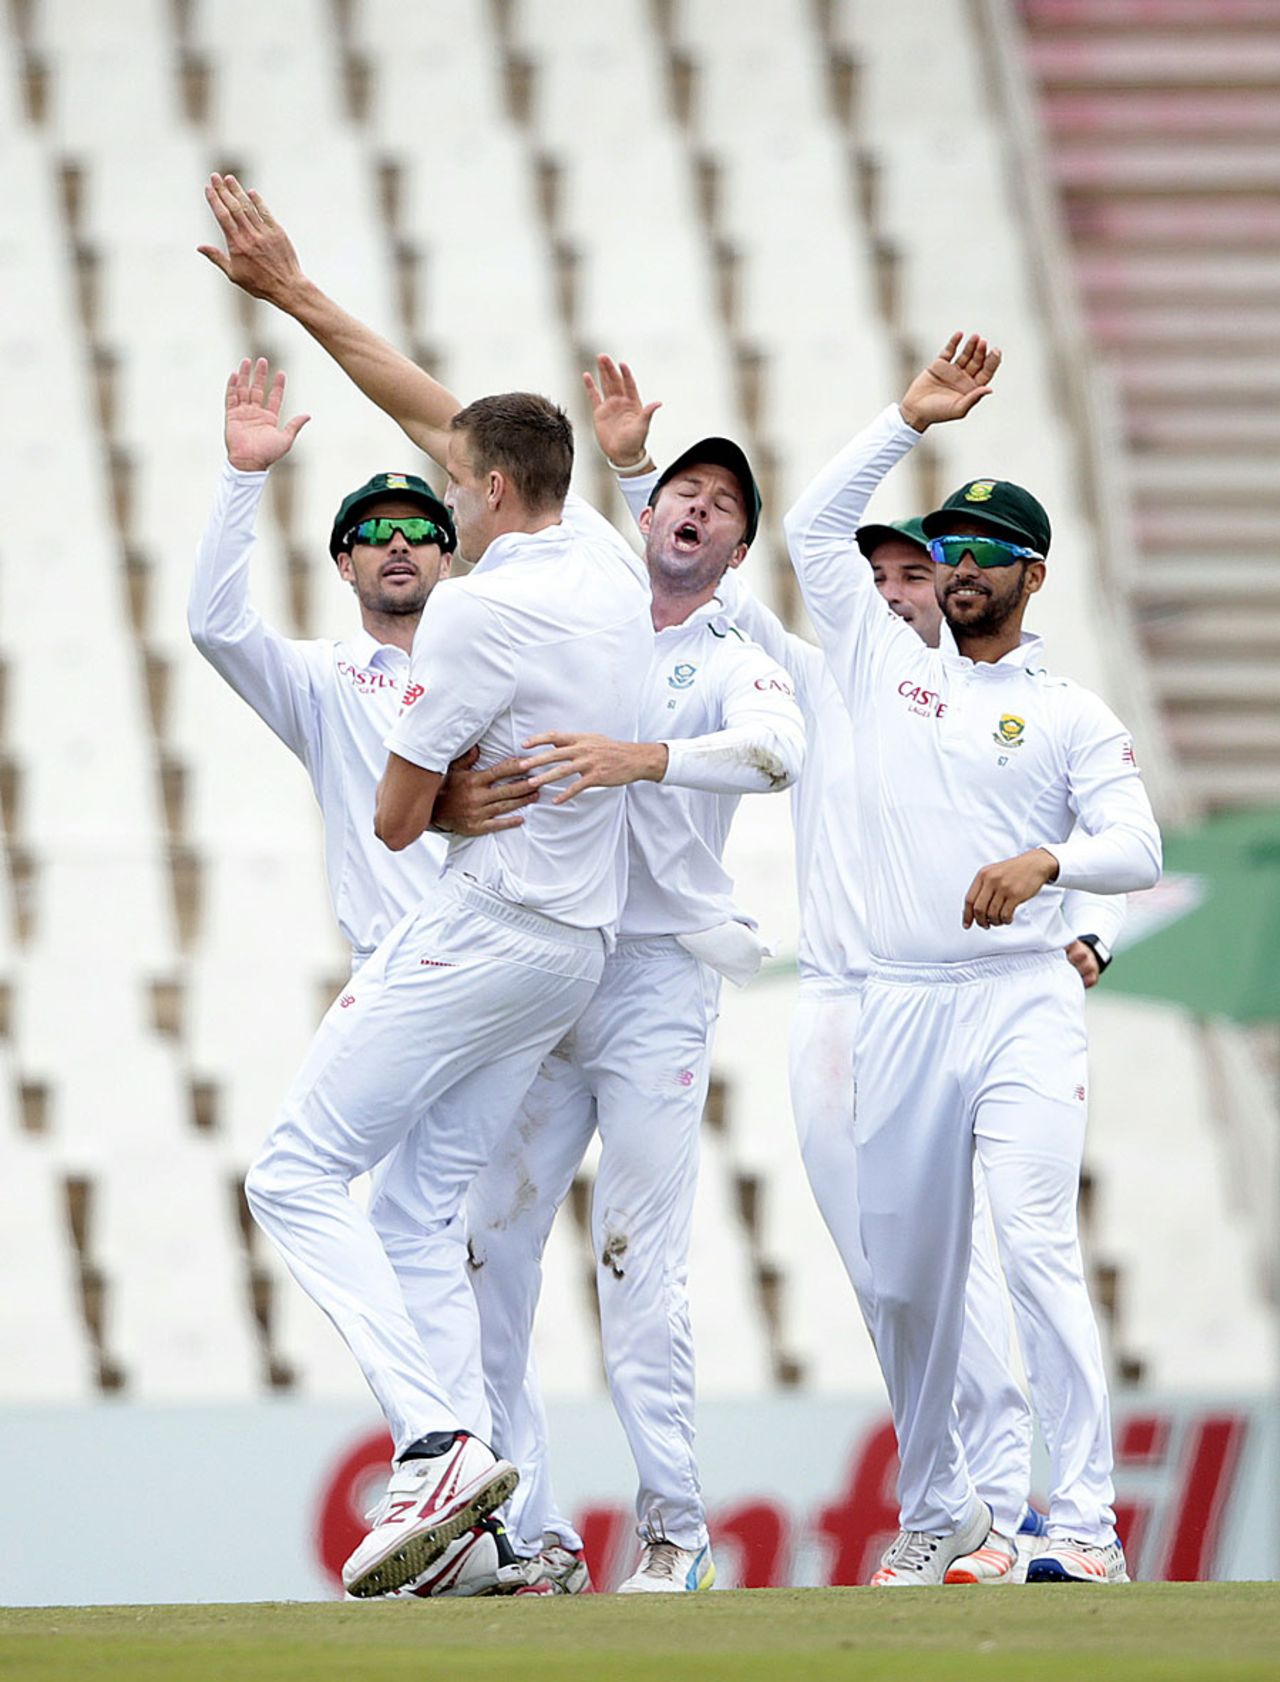 Morne Morkel struck the first blow of the day to remove James Taylor, South Africa v England, 4th Test, Centurion, 5th day, January 26, 2016